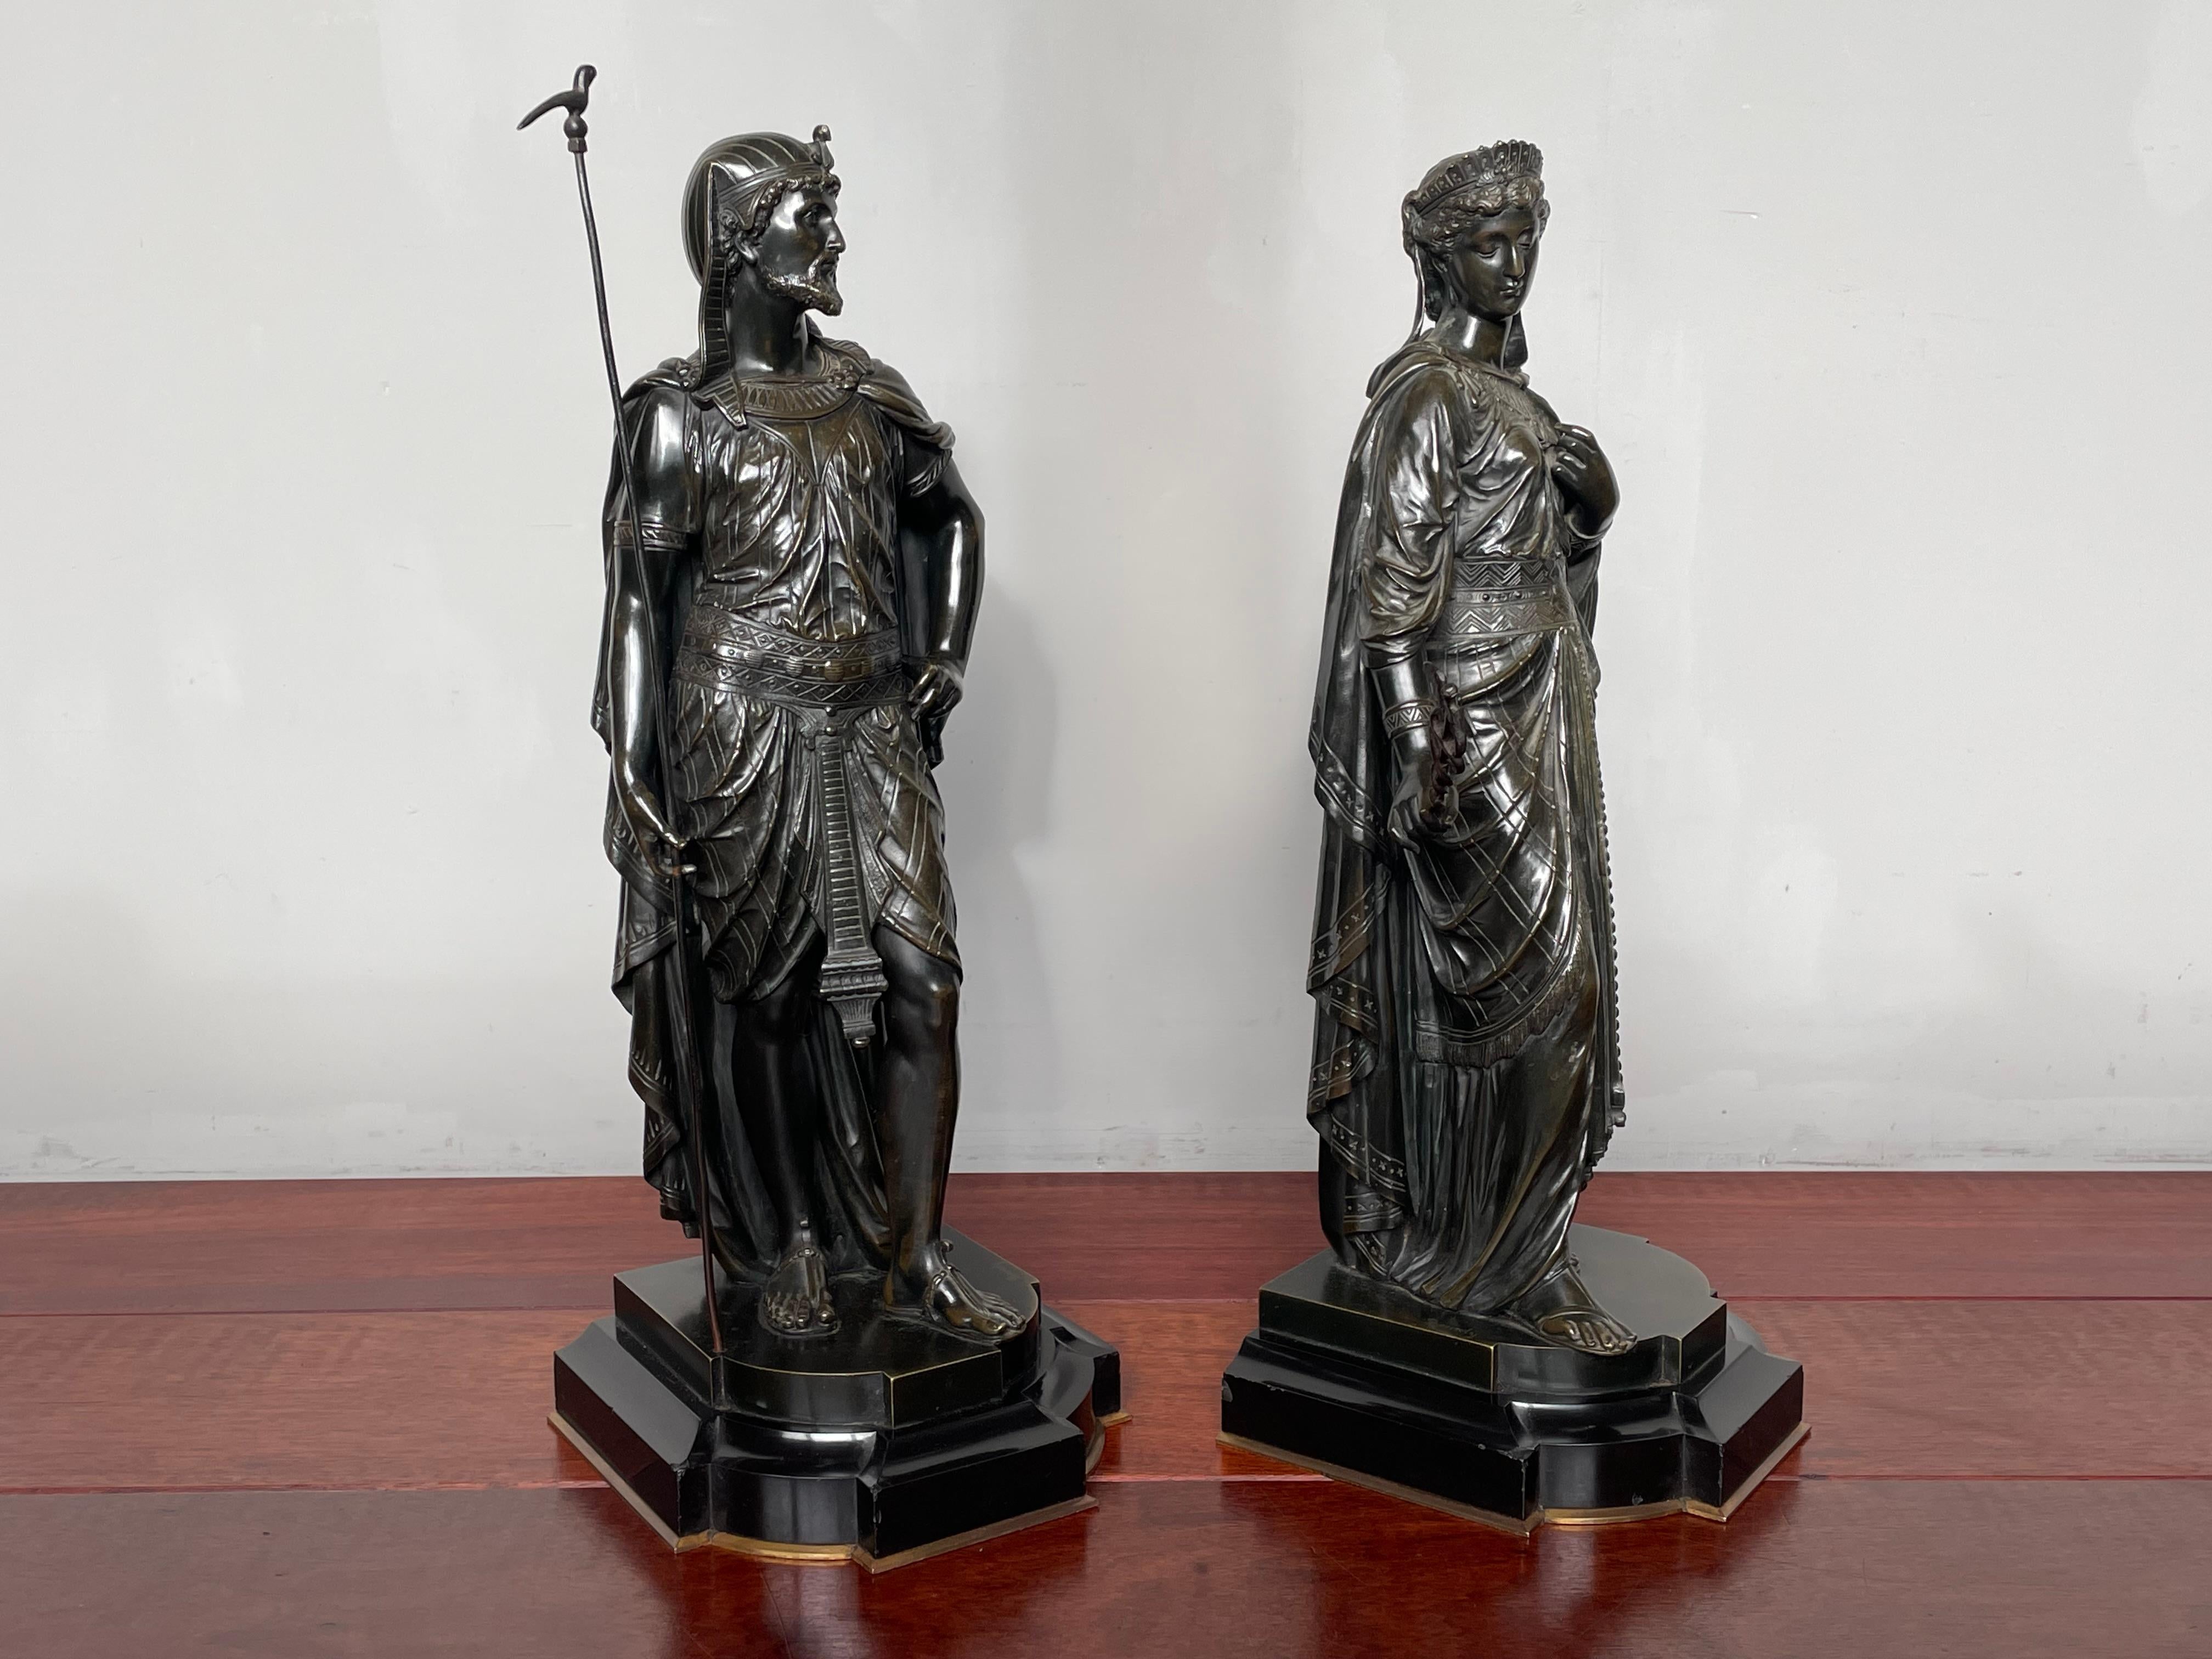 Stunning pair of antique bronze statues of the highest quality.

If you are interested in exceptional antiques in general and in Egyptian Revival antiques in particular then this stunning and original, Parisian-made pair could be there to grace your